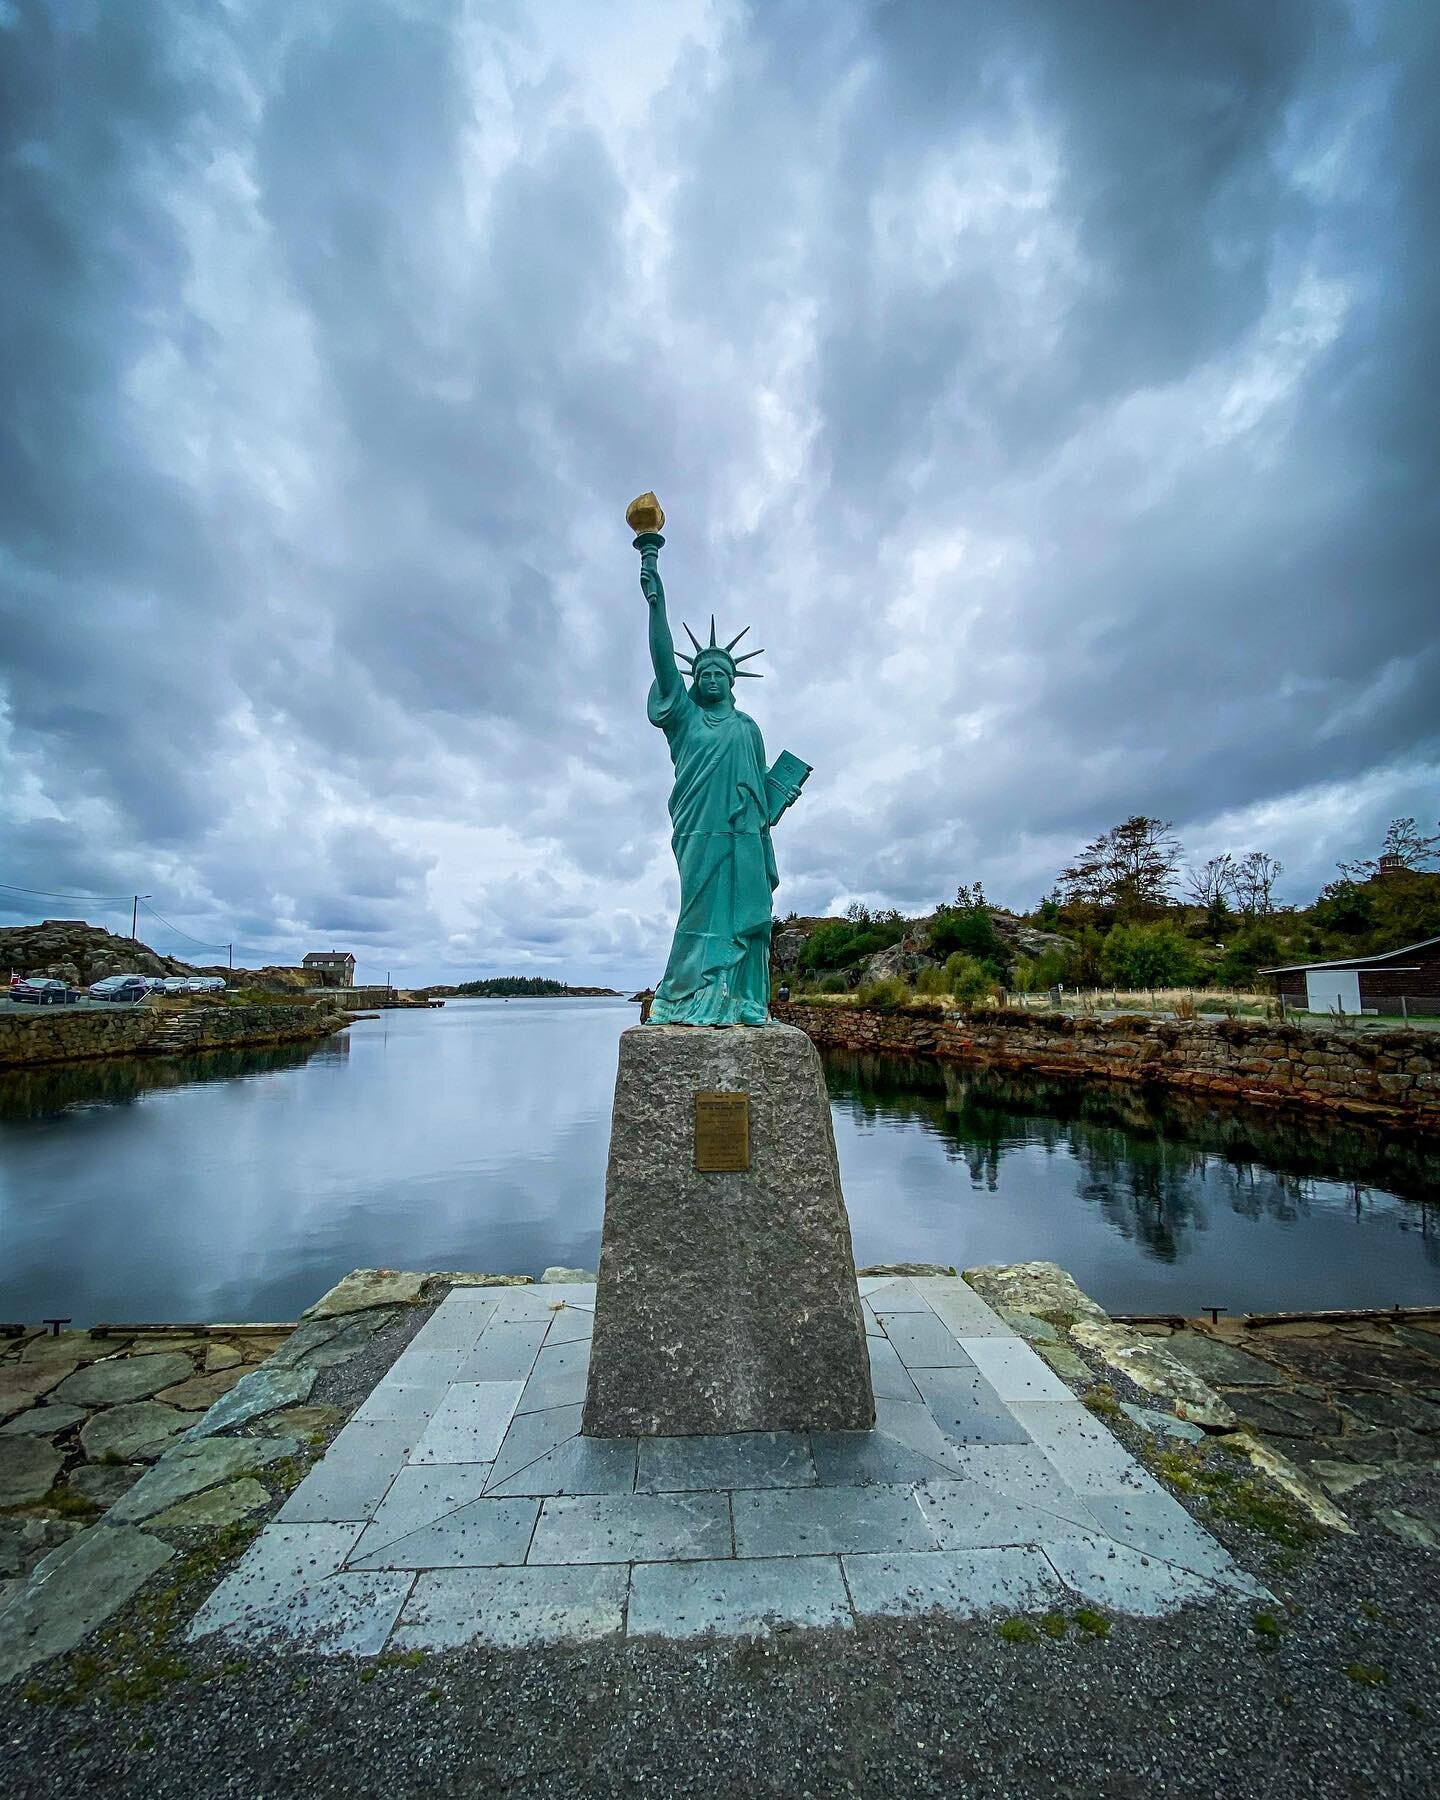 Did you know that the Statue of Liberty in New York is built of copper from the Visnes Mines! Definitely something worth seeing on your next roadtrip👍🏻
🔹
🔹
🔹

#atlascarrental #norge #statueofliberty #carrental #enjoy #visitnorway #haugasund #vis